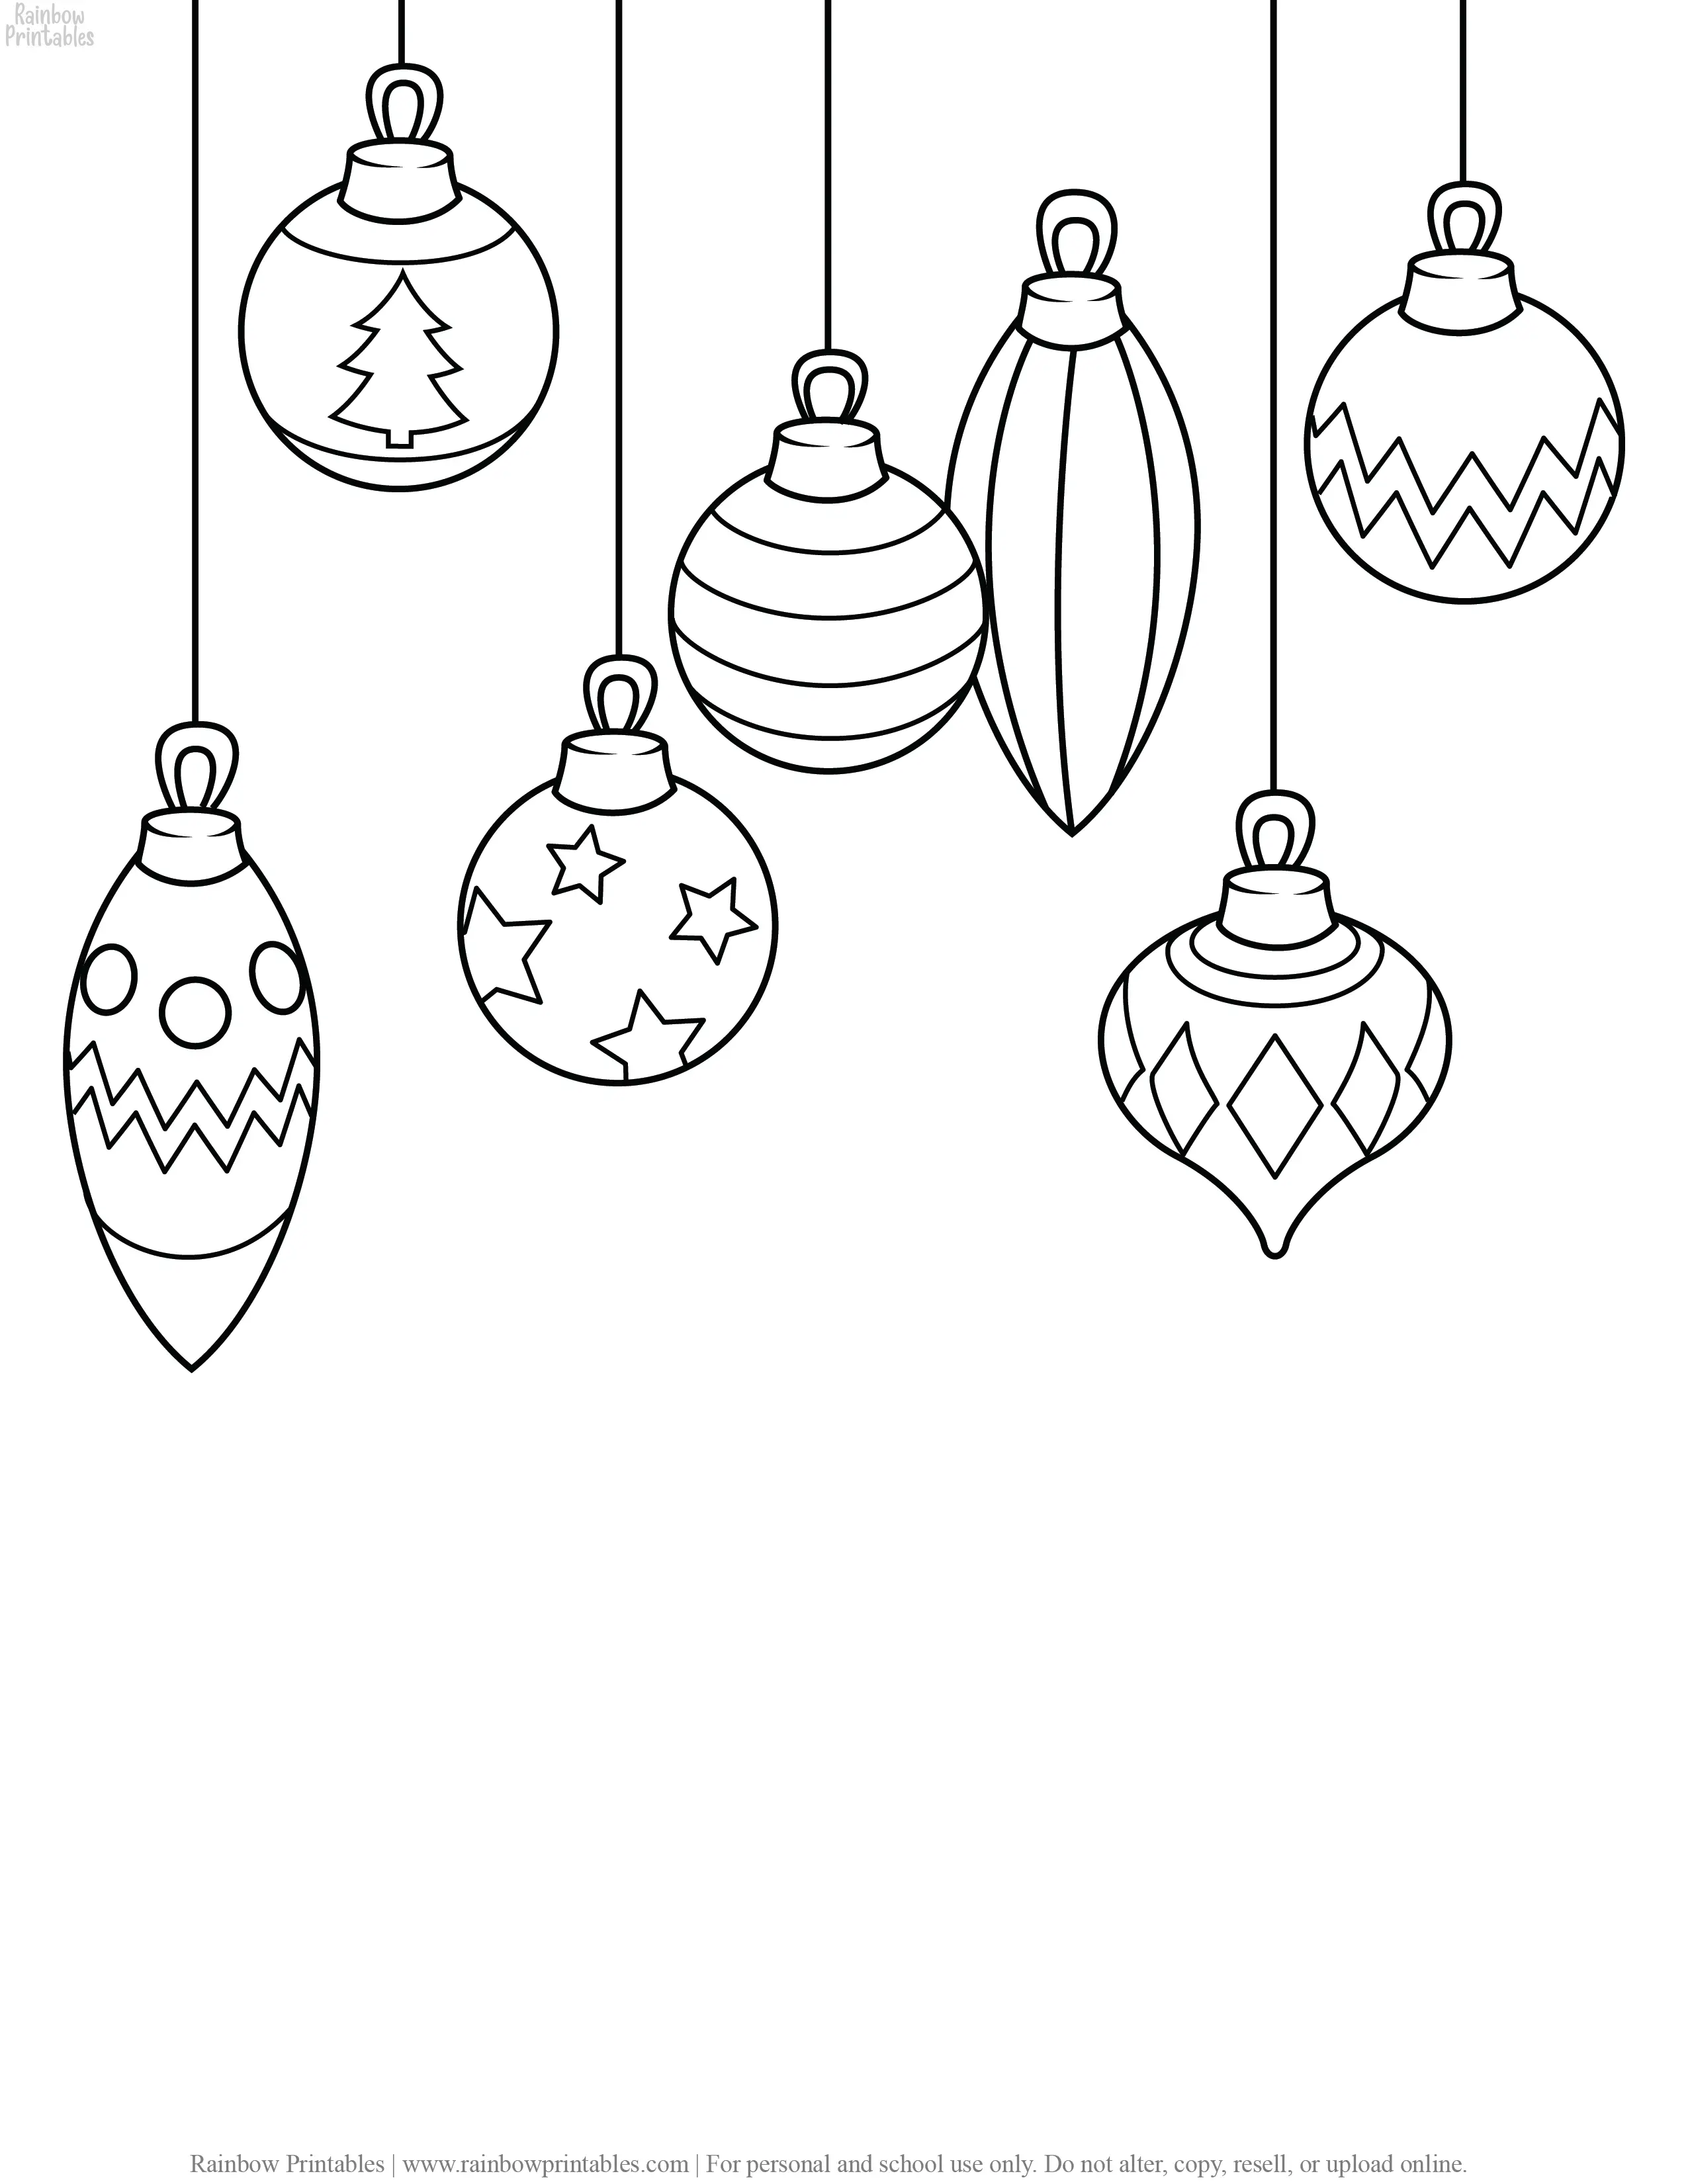 FREE CHRISTMAS HOLIDAY COLORING PAGES FOR KIDS, PRINTABLE XMAS BOREDOM BUSTER, SNOWFLAKE, REINDEER, CANDY CANE